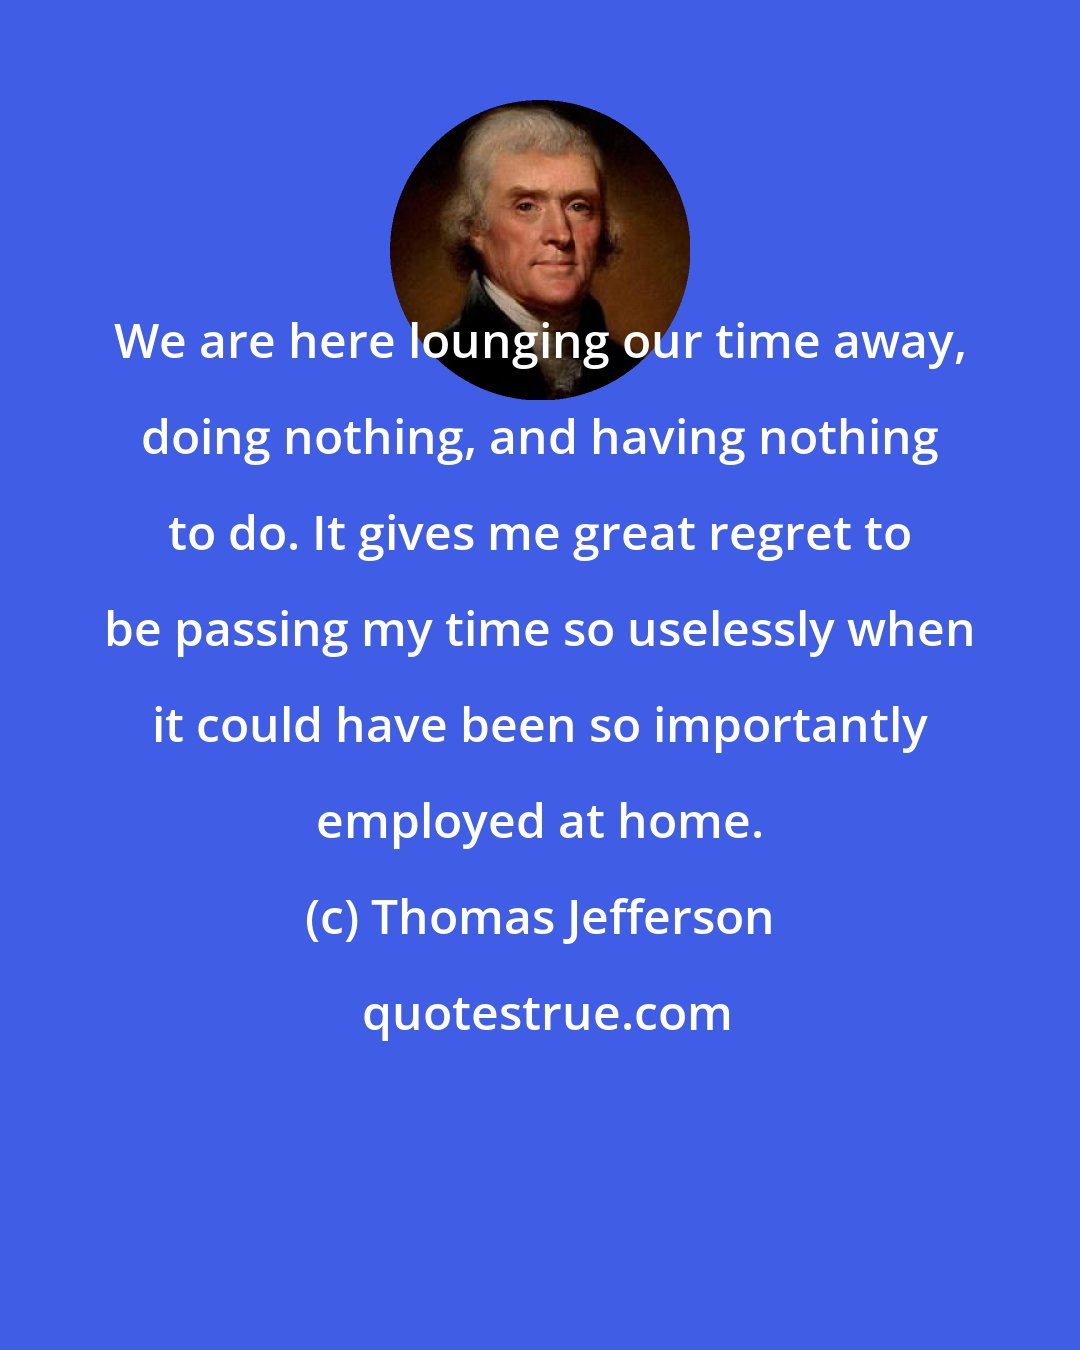 Thomas Jefferson: We are here lounging our time away, doing nothing, and having nothing to do. It gives me great regret to be passing my time so uselessly when it could have been so importantly employed at home.